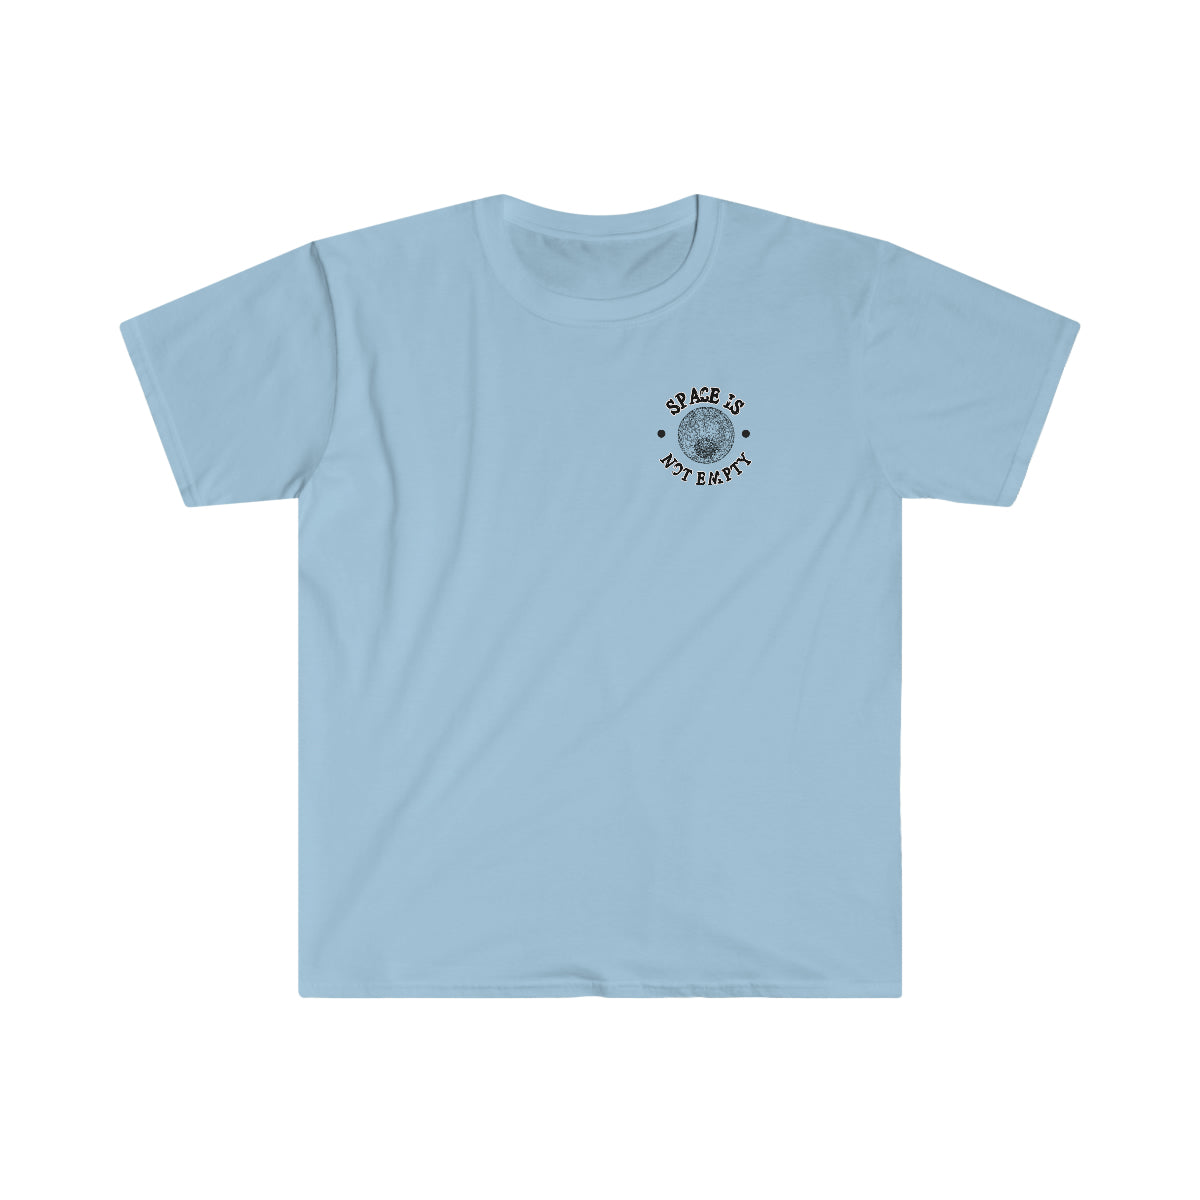 A Lunar Accenting T-Shirt with a light blue stylish t-shirt with a circle on it.